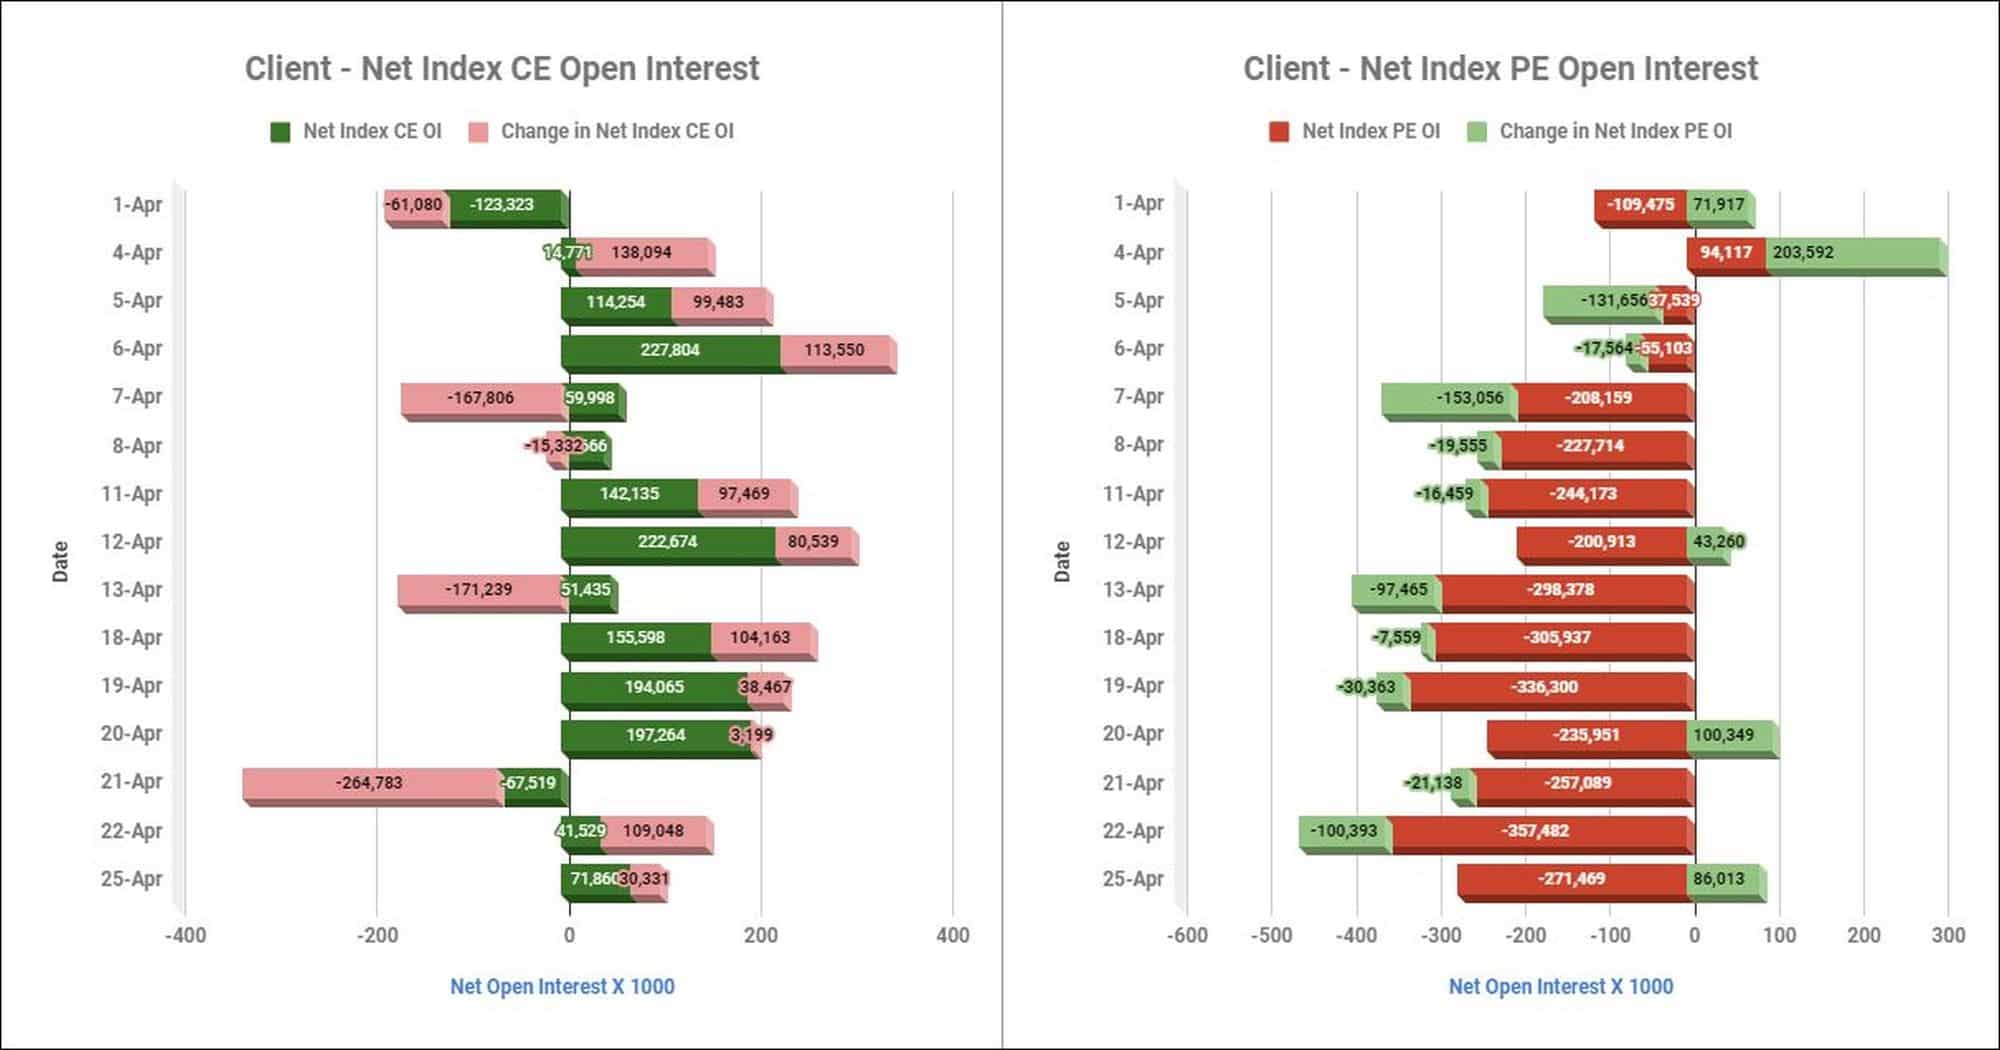 Clientinop25Apr Participantwise Net Open Interest And Net Equity Investments – 25Th Apr 2022 Client, Equity, Fii, Index Futures, Index Options, Open Interest, Prop